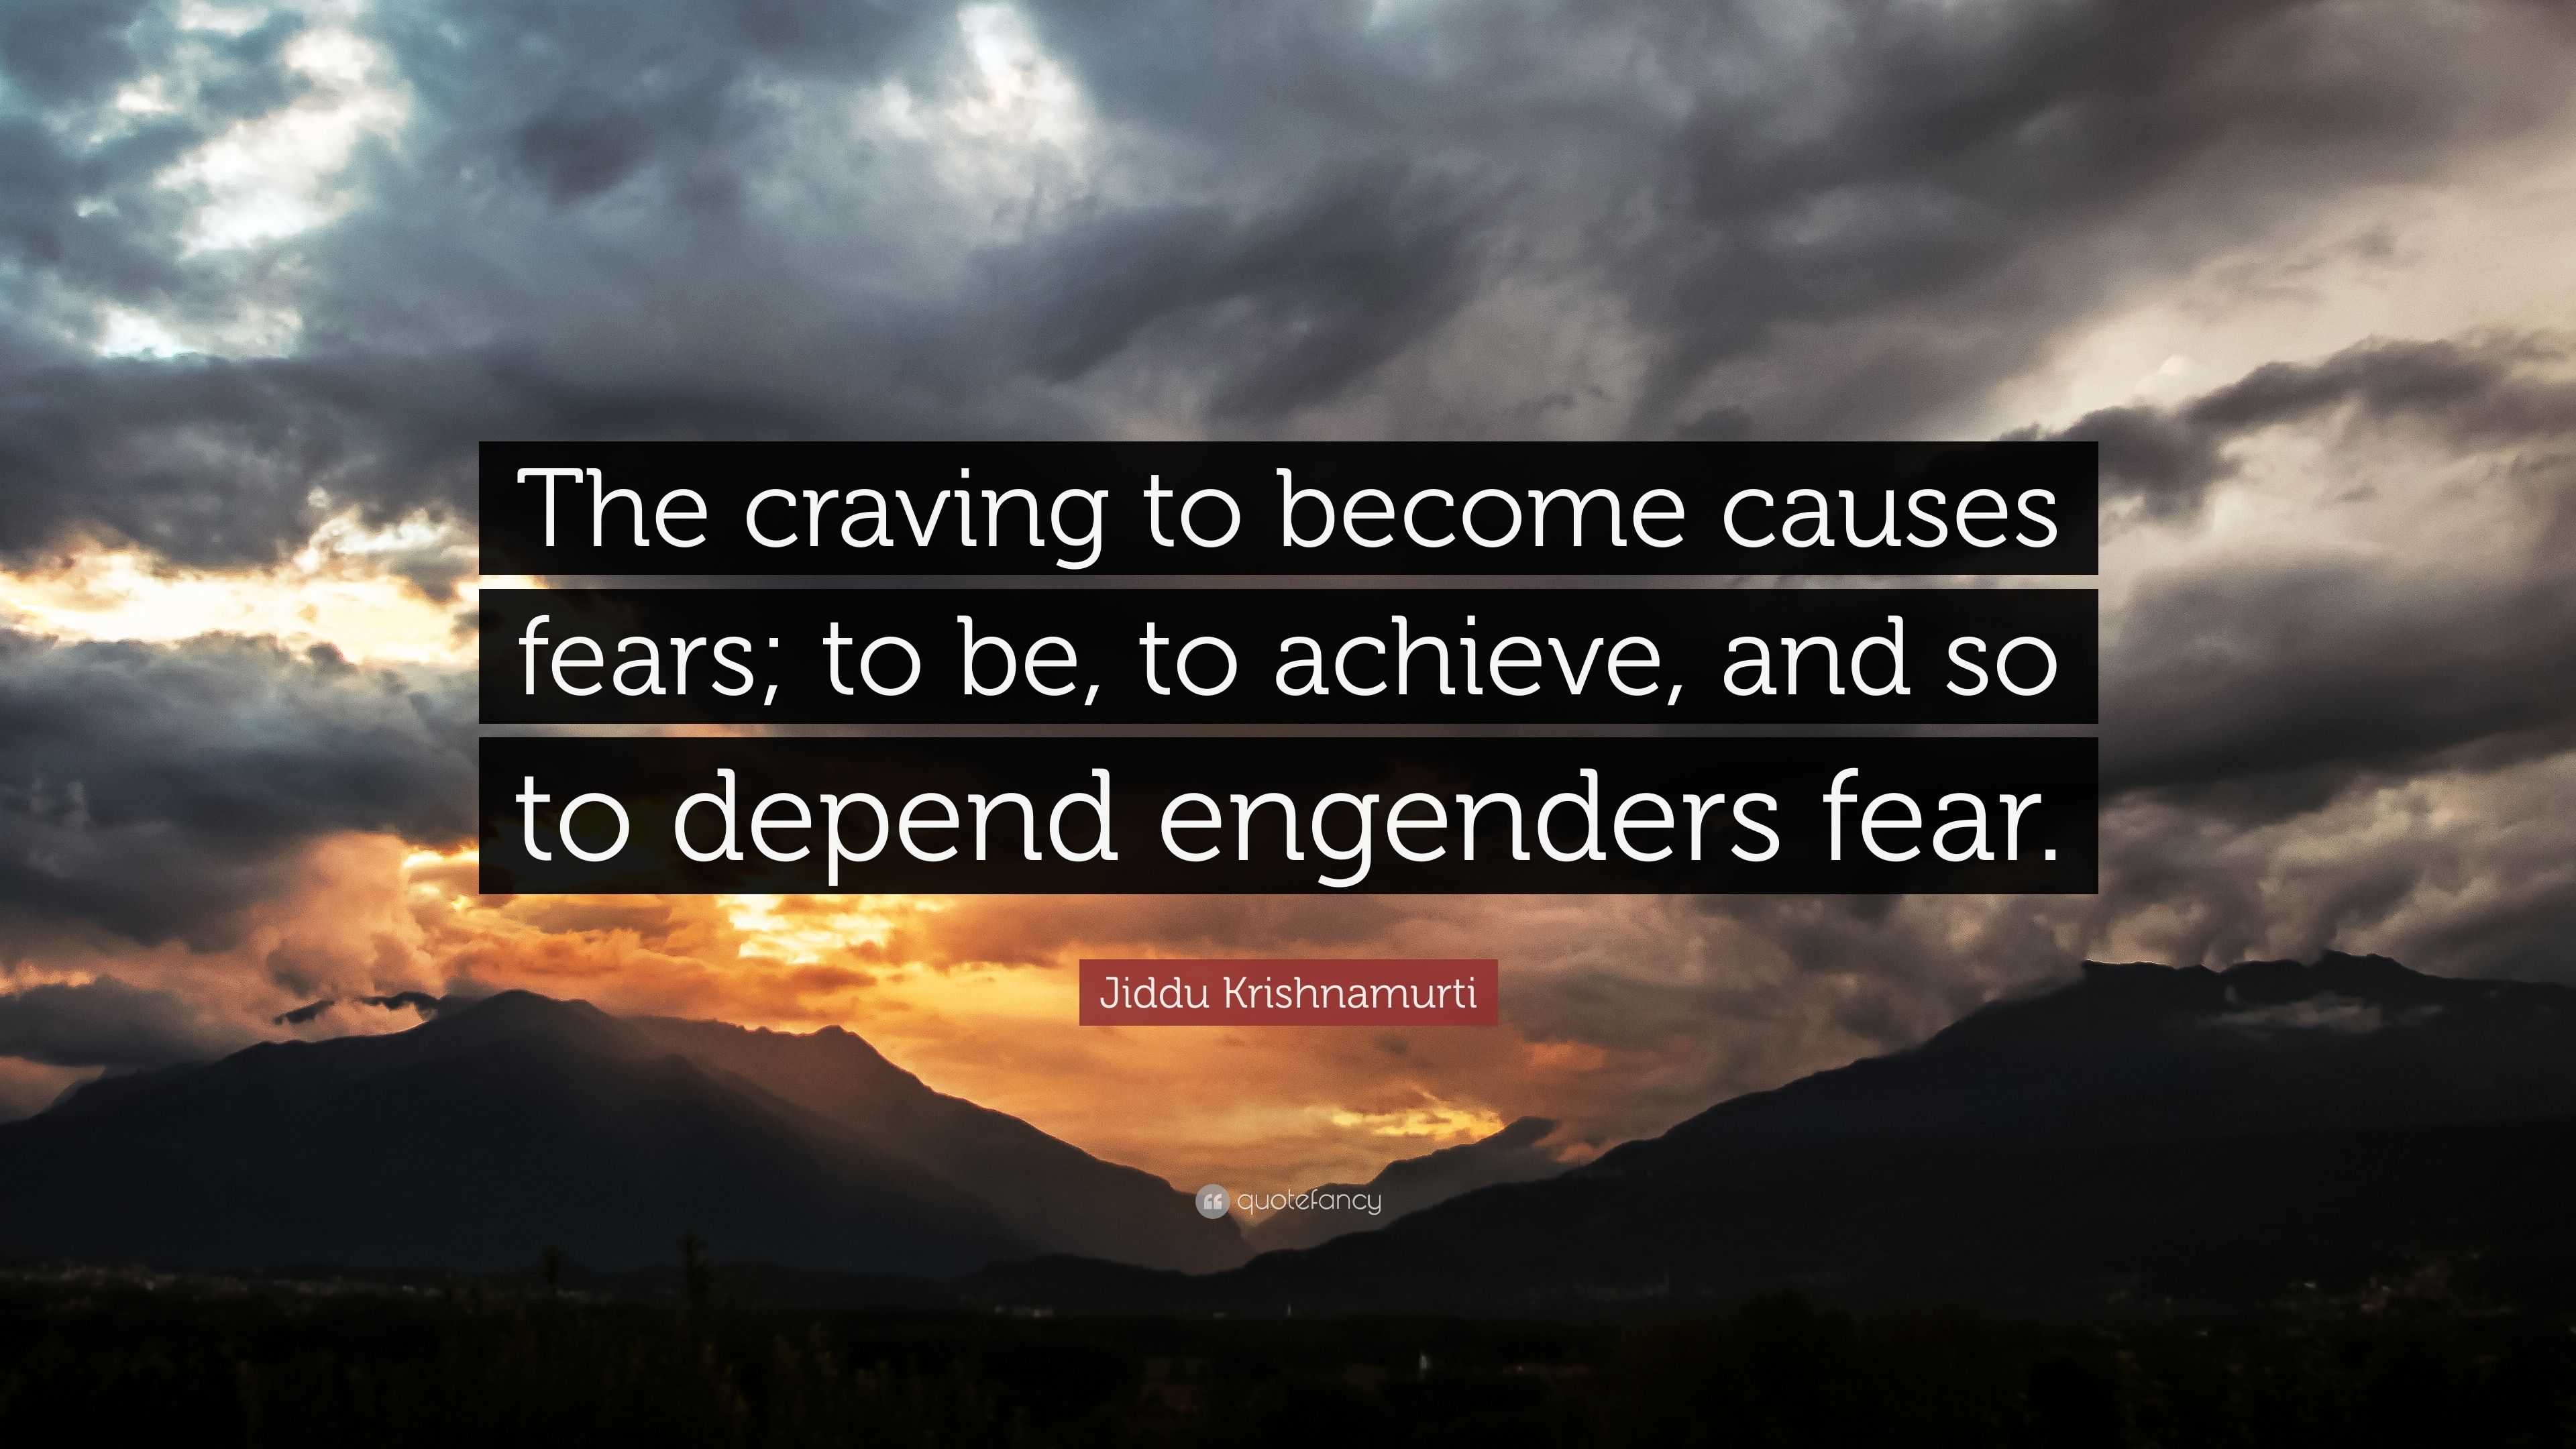 Jiddu Krishnamurti Quote: “The craving to become causes fears; to be ...